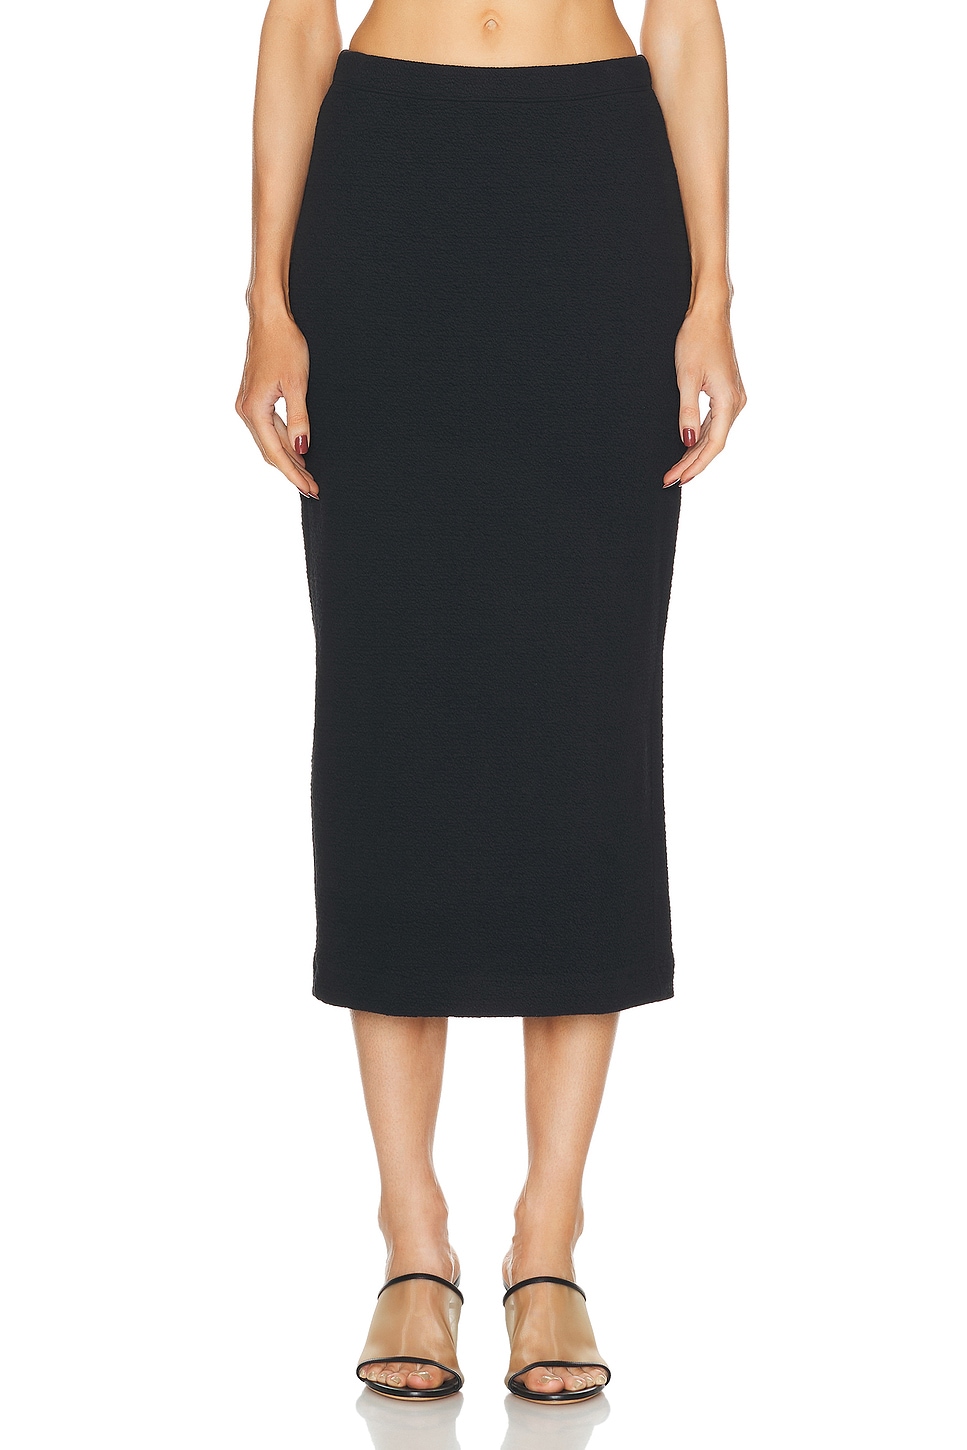 Image 1 of Enza Costa Textured Jacquard Skirt in Black